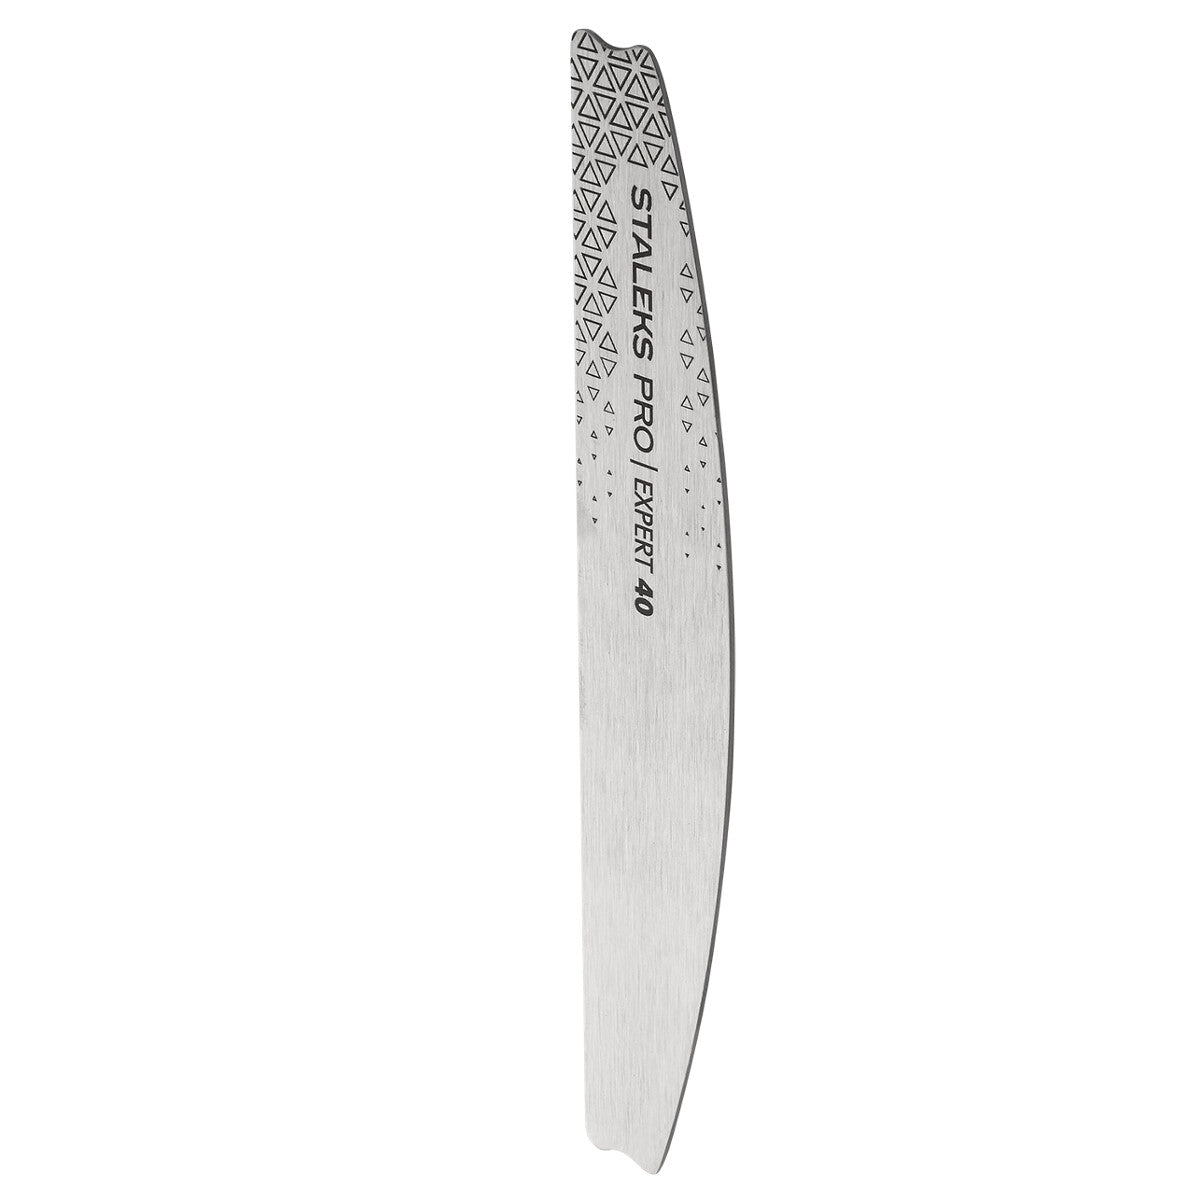    Staleks_Nail_file_metal_crescent_Base_EXPERT_40_MBE-40_4 product view 1